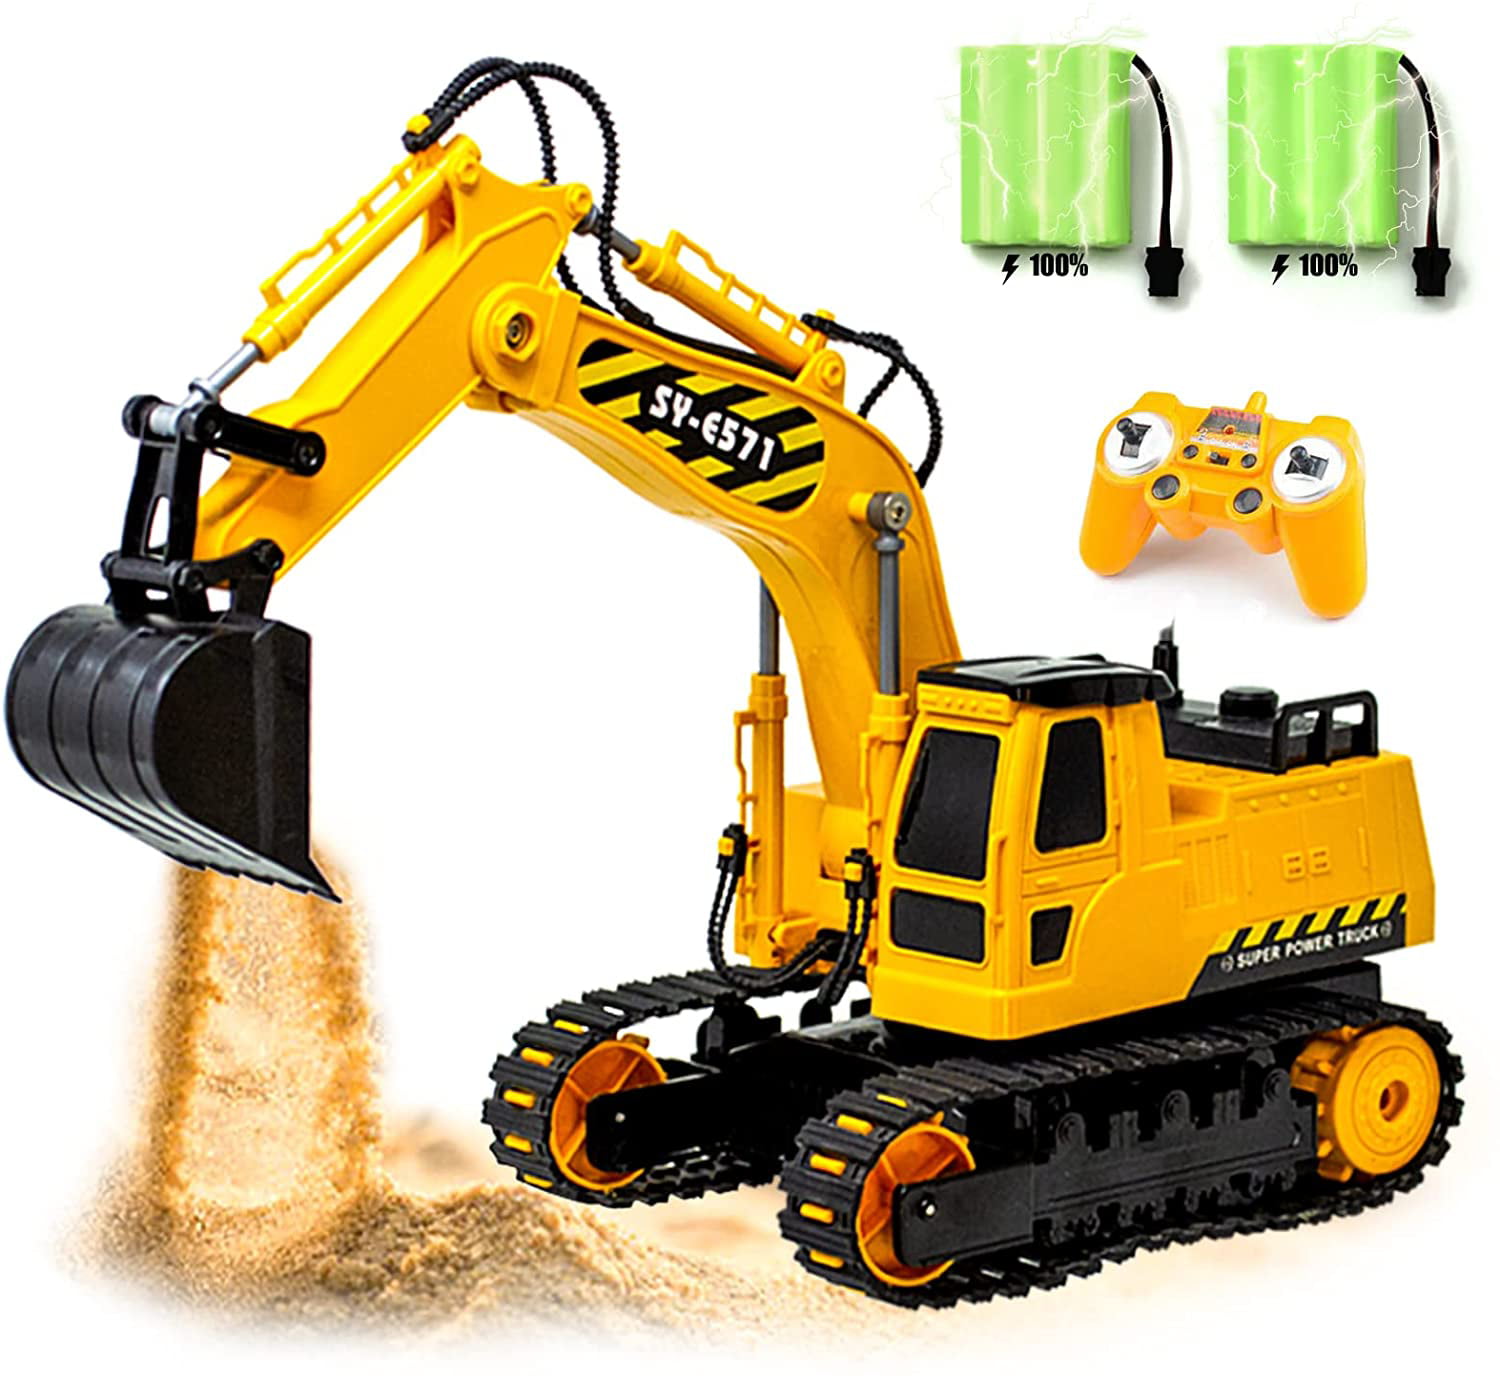 1/24 Construction RC Excavator Remote Control Truck Car Toys Kids Birthday Gift 